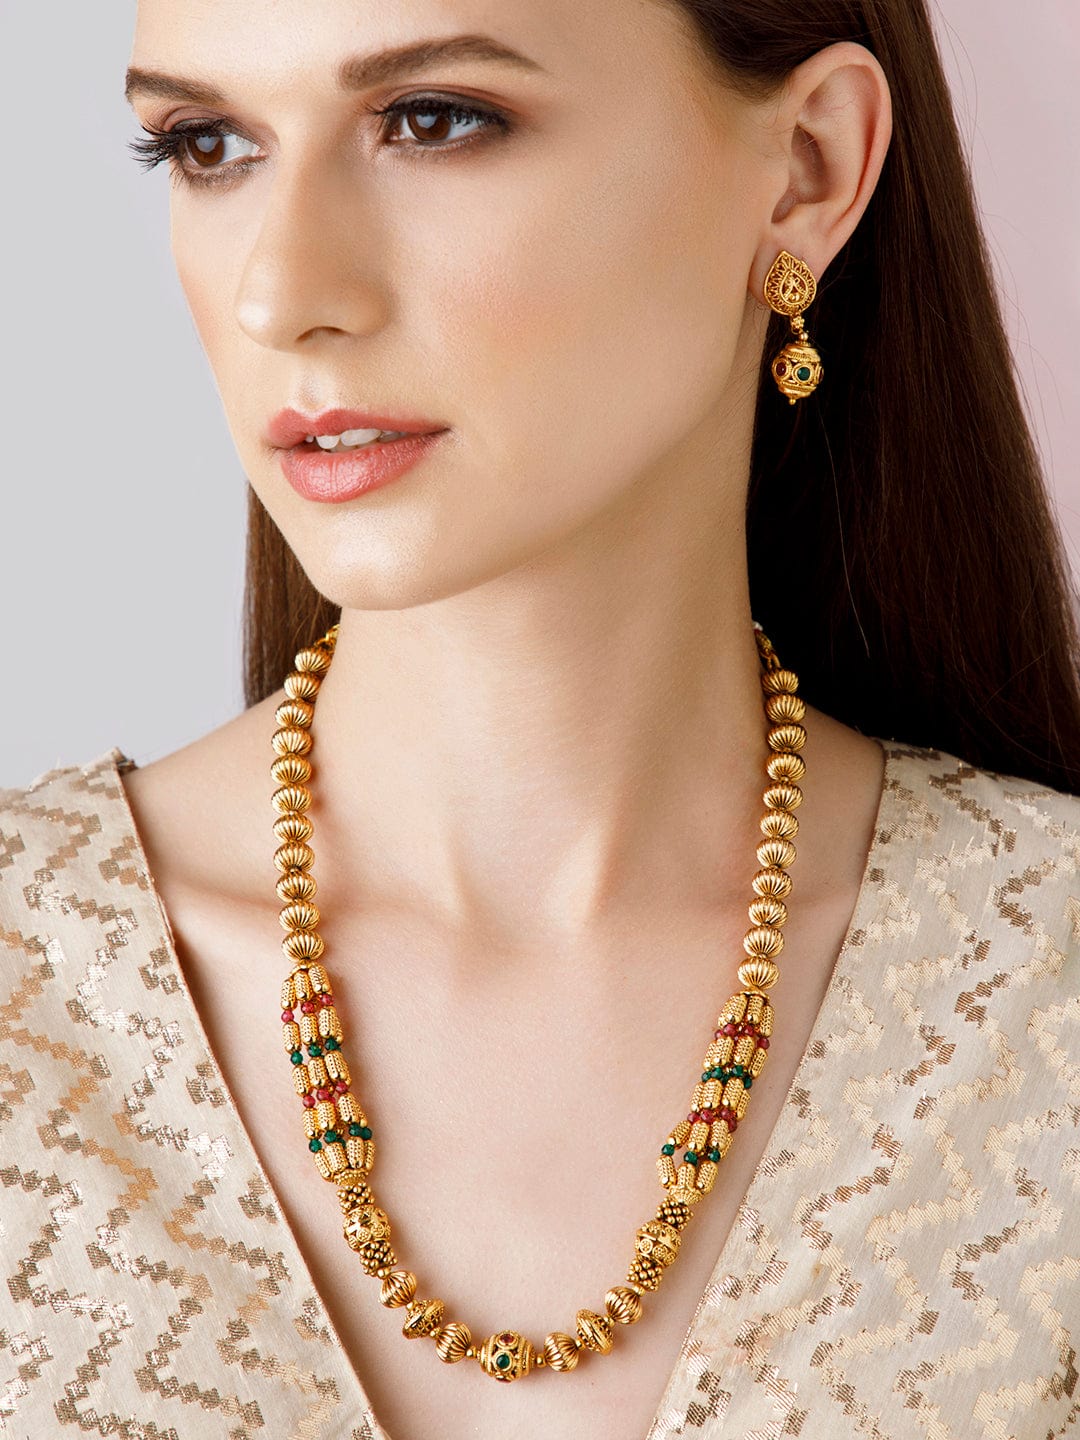 Rubans 24K Gold Plated Long Temple Necklace Set With Beads Design. Necklace Set